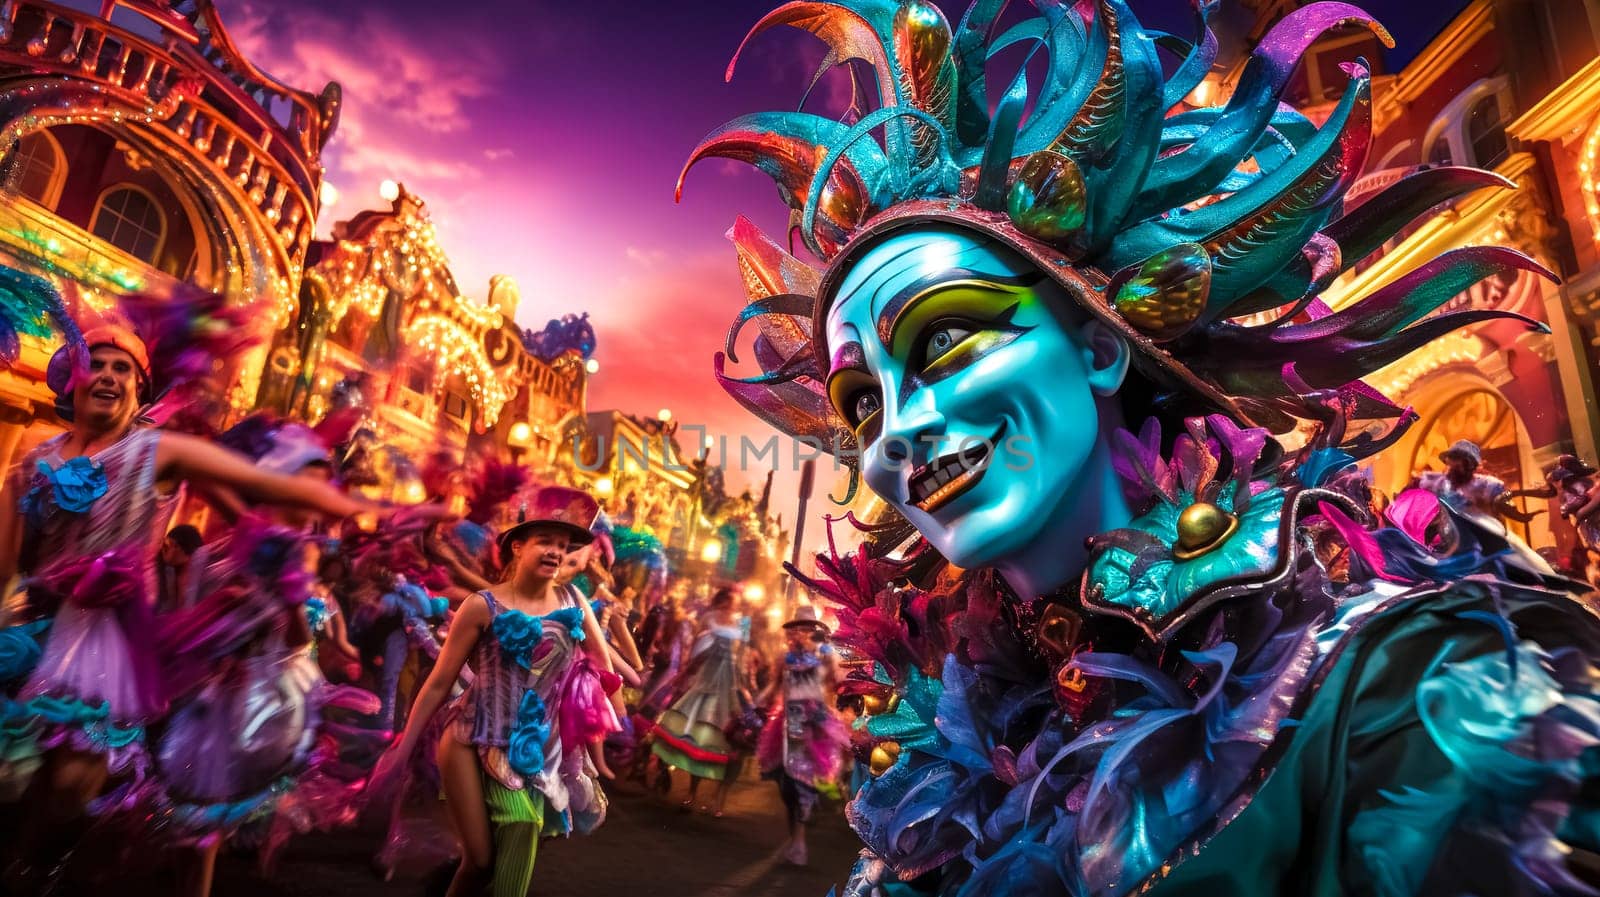 carnival in the sign of dance and colorful costumes and masks by Edophoto